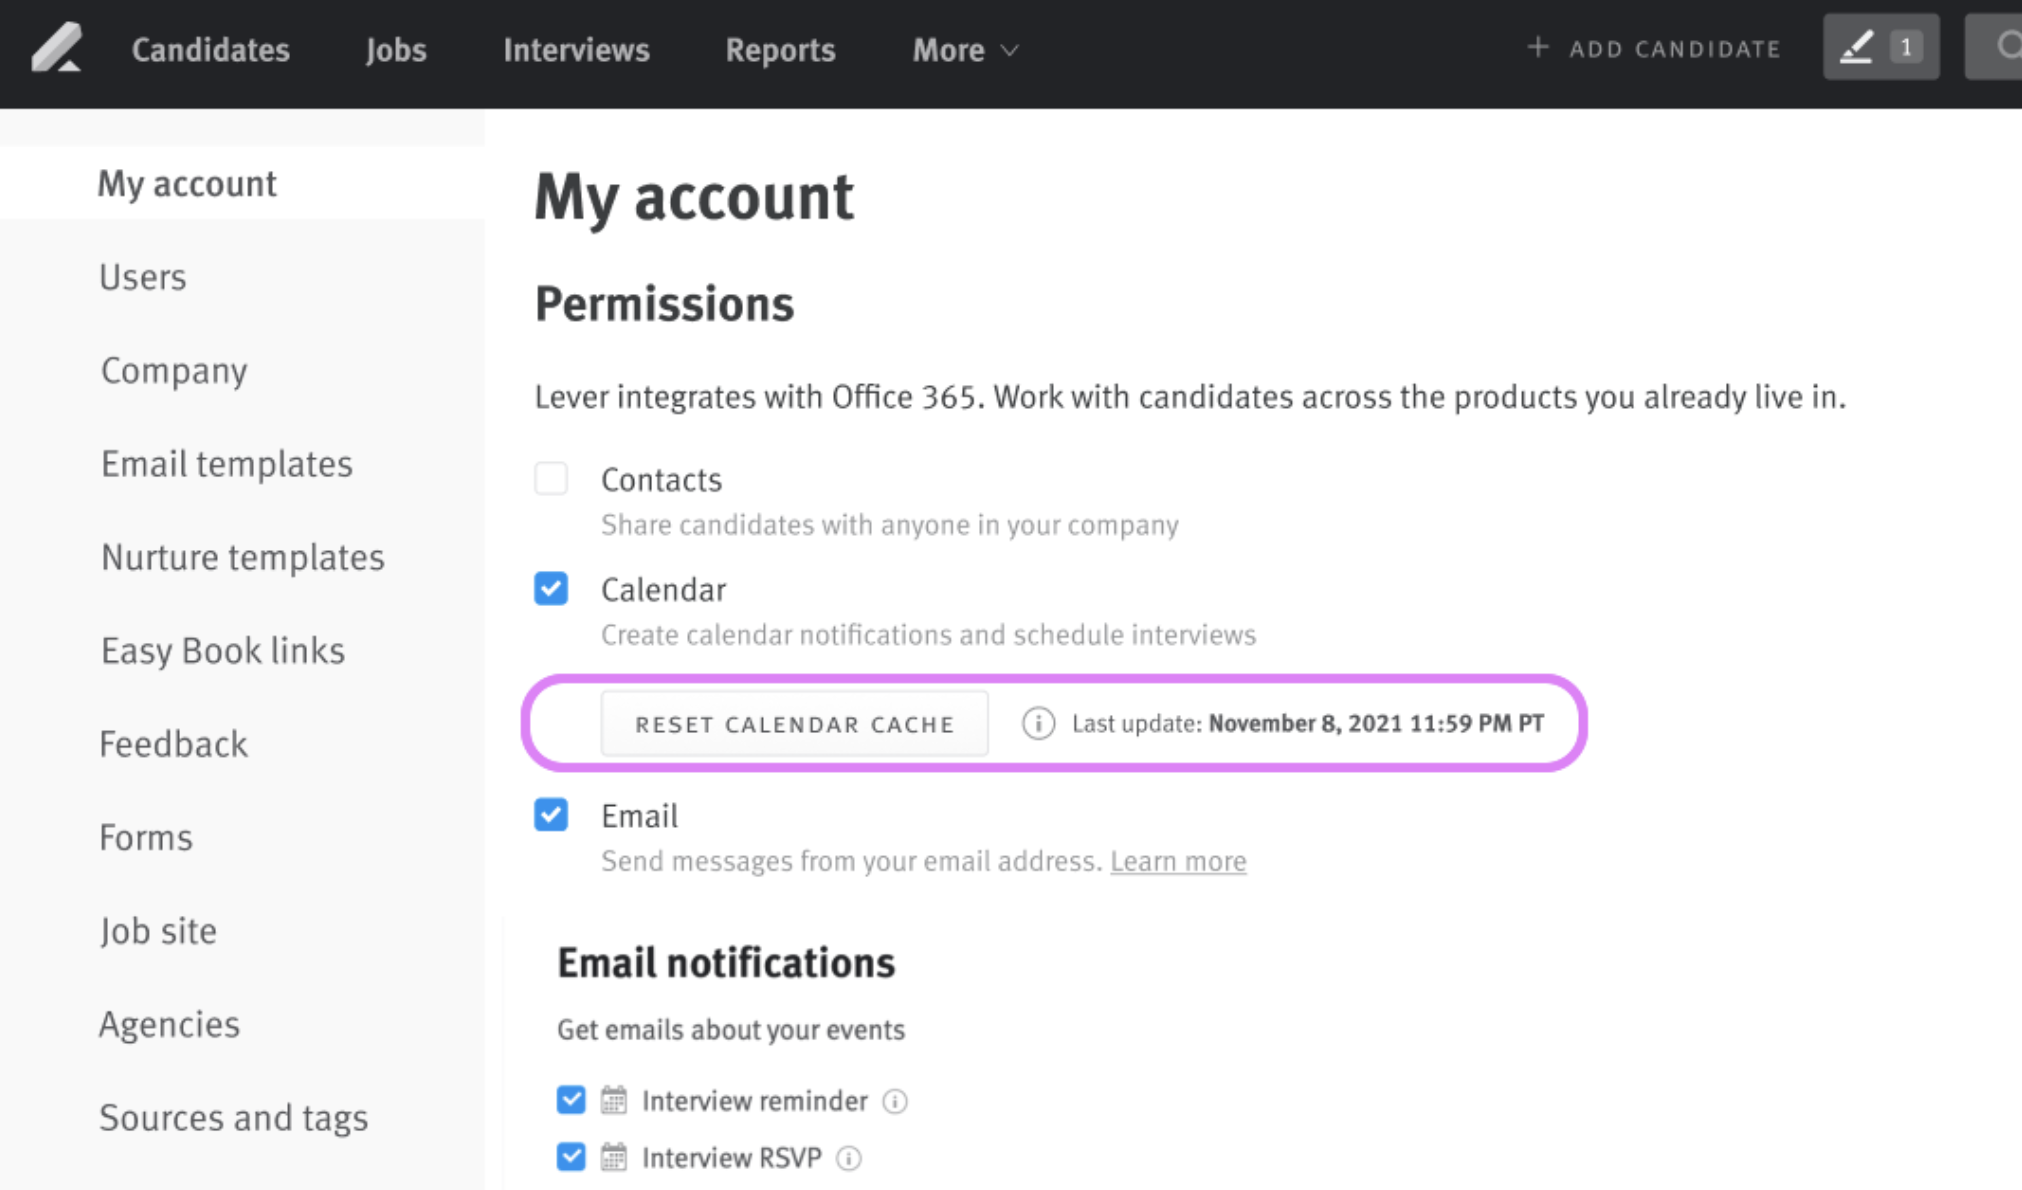 My account section of Setting page with Reset Calendar Cache button circled under Calendar permission field.